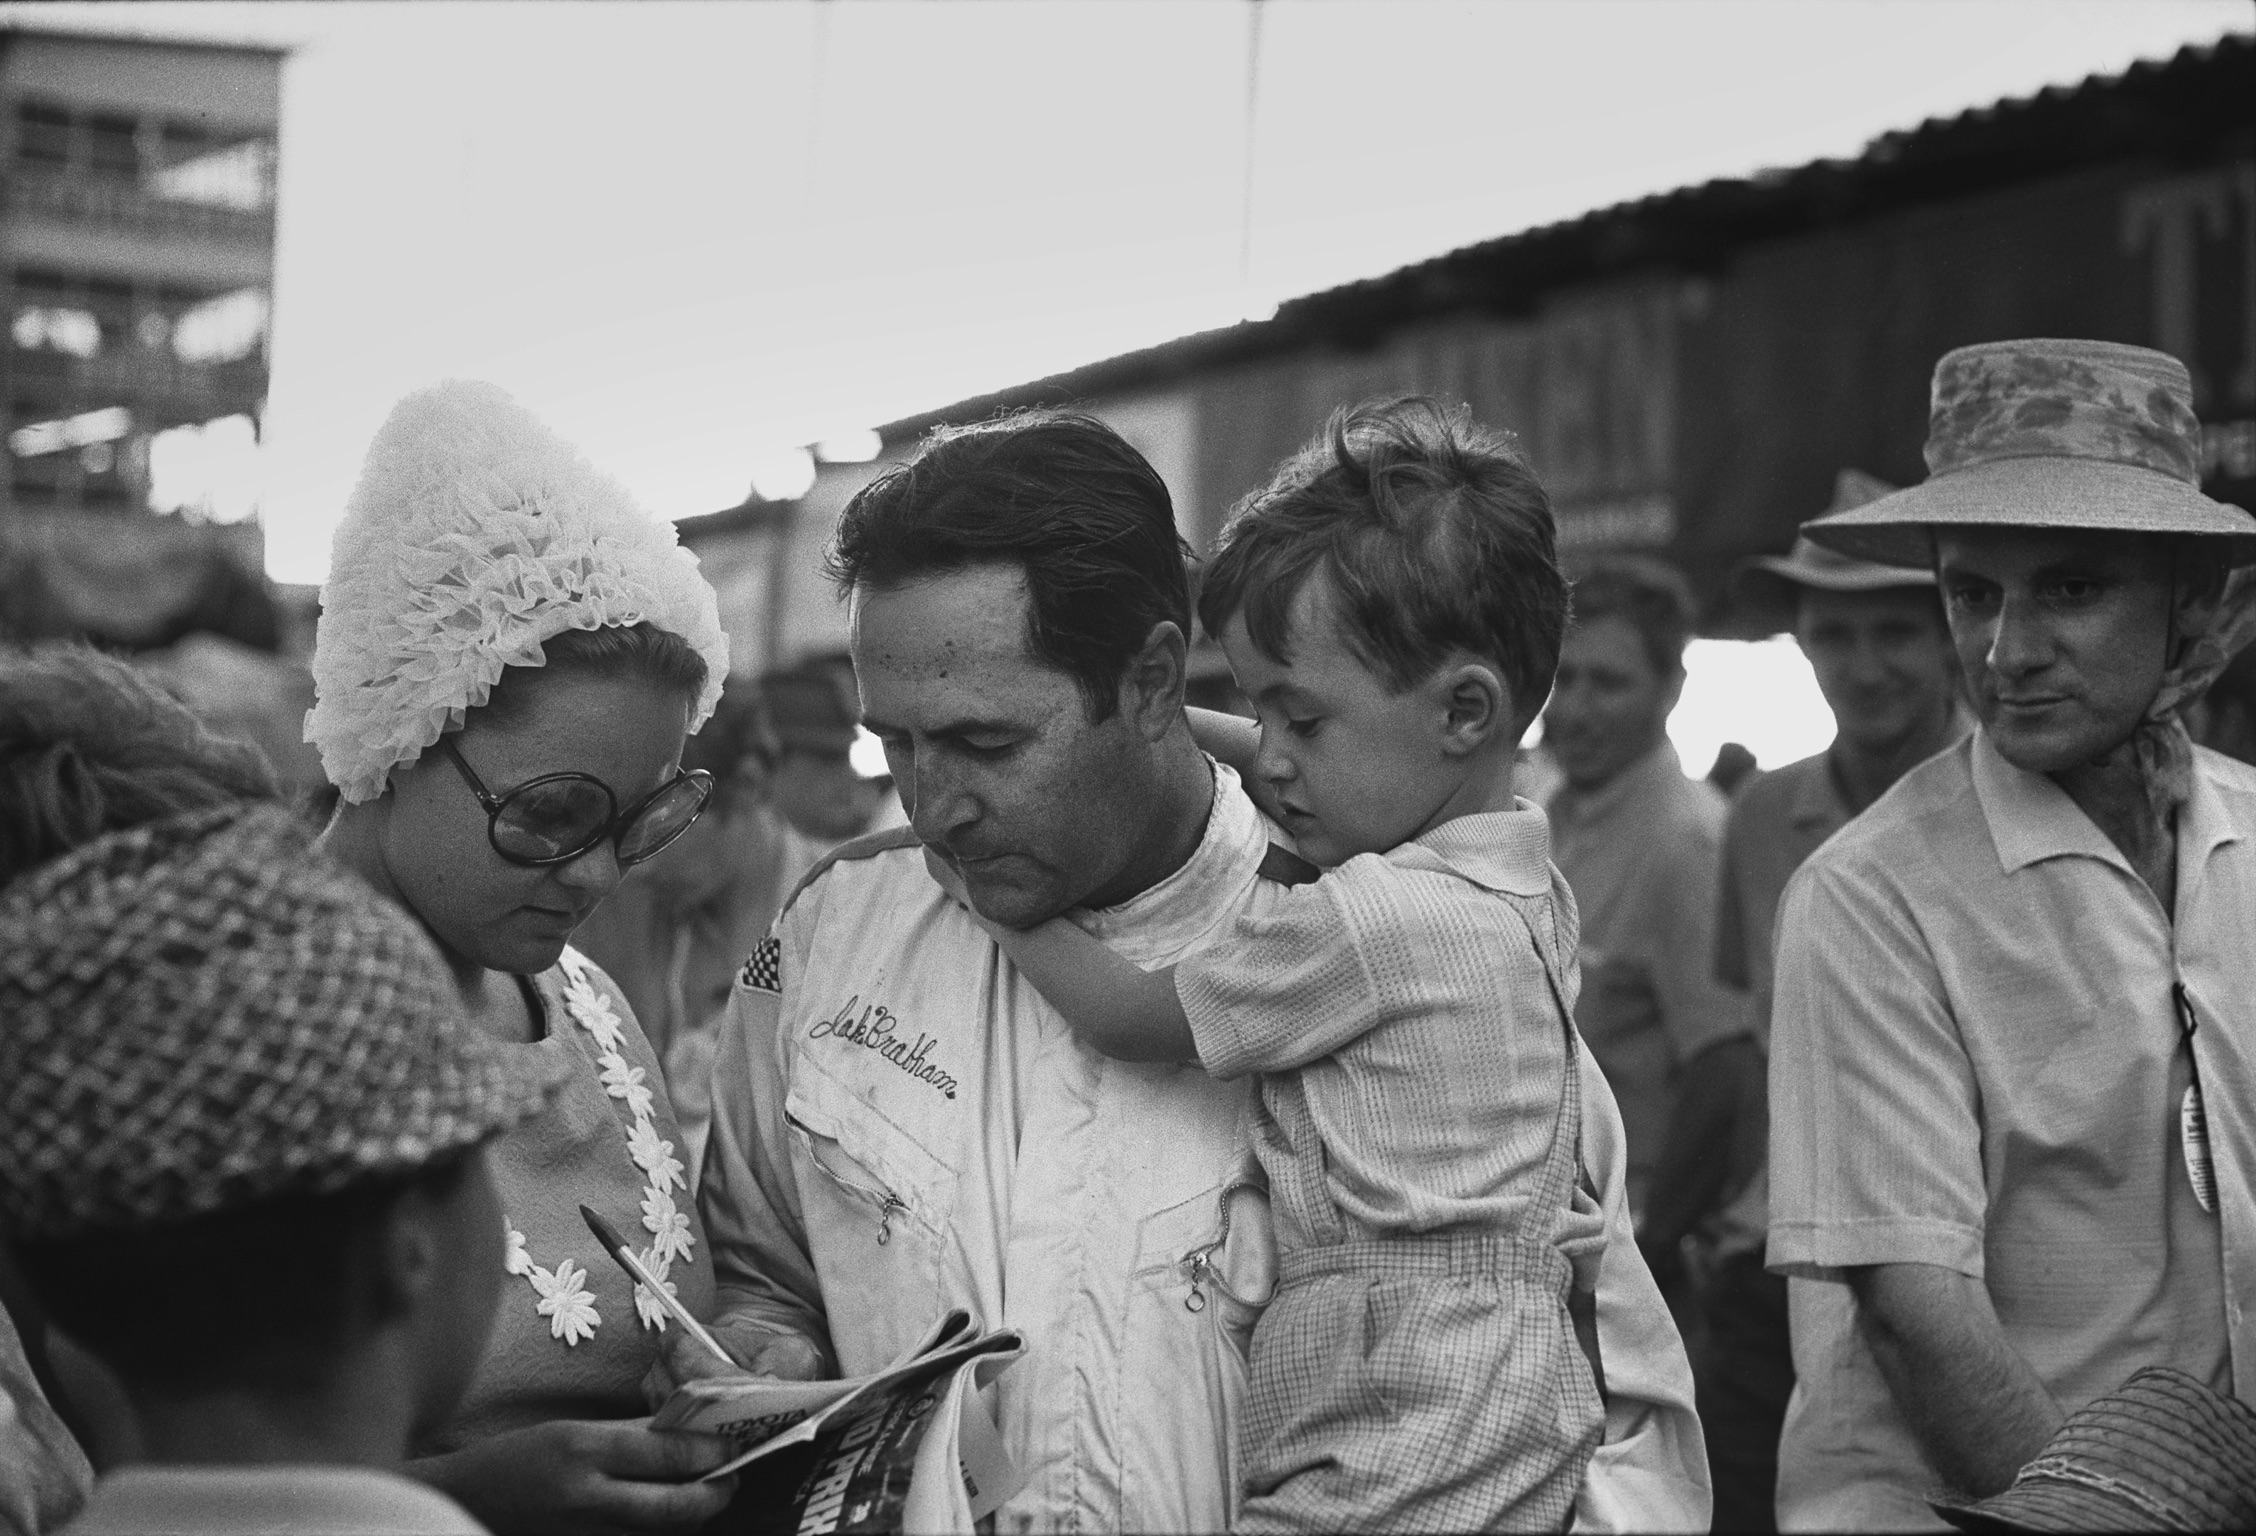 Jack Brabham with son David in his arms, 1970 South African Grand Prix.